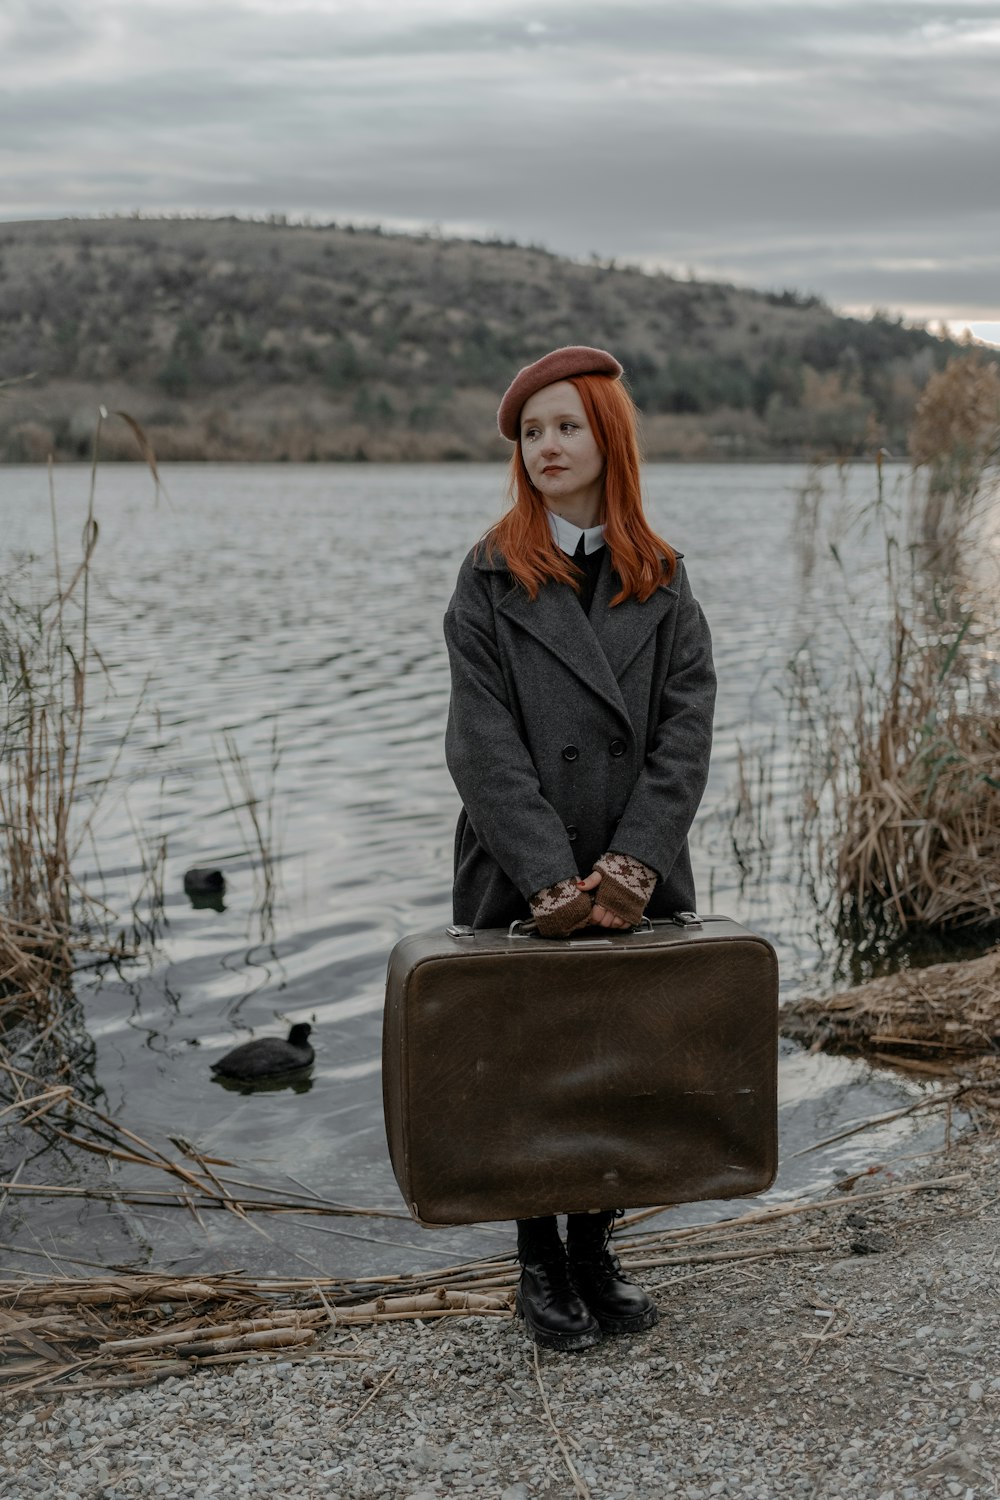 a woman with red hair is holding a suitcase